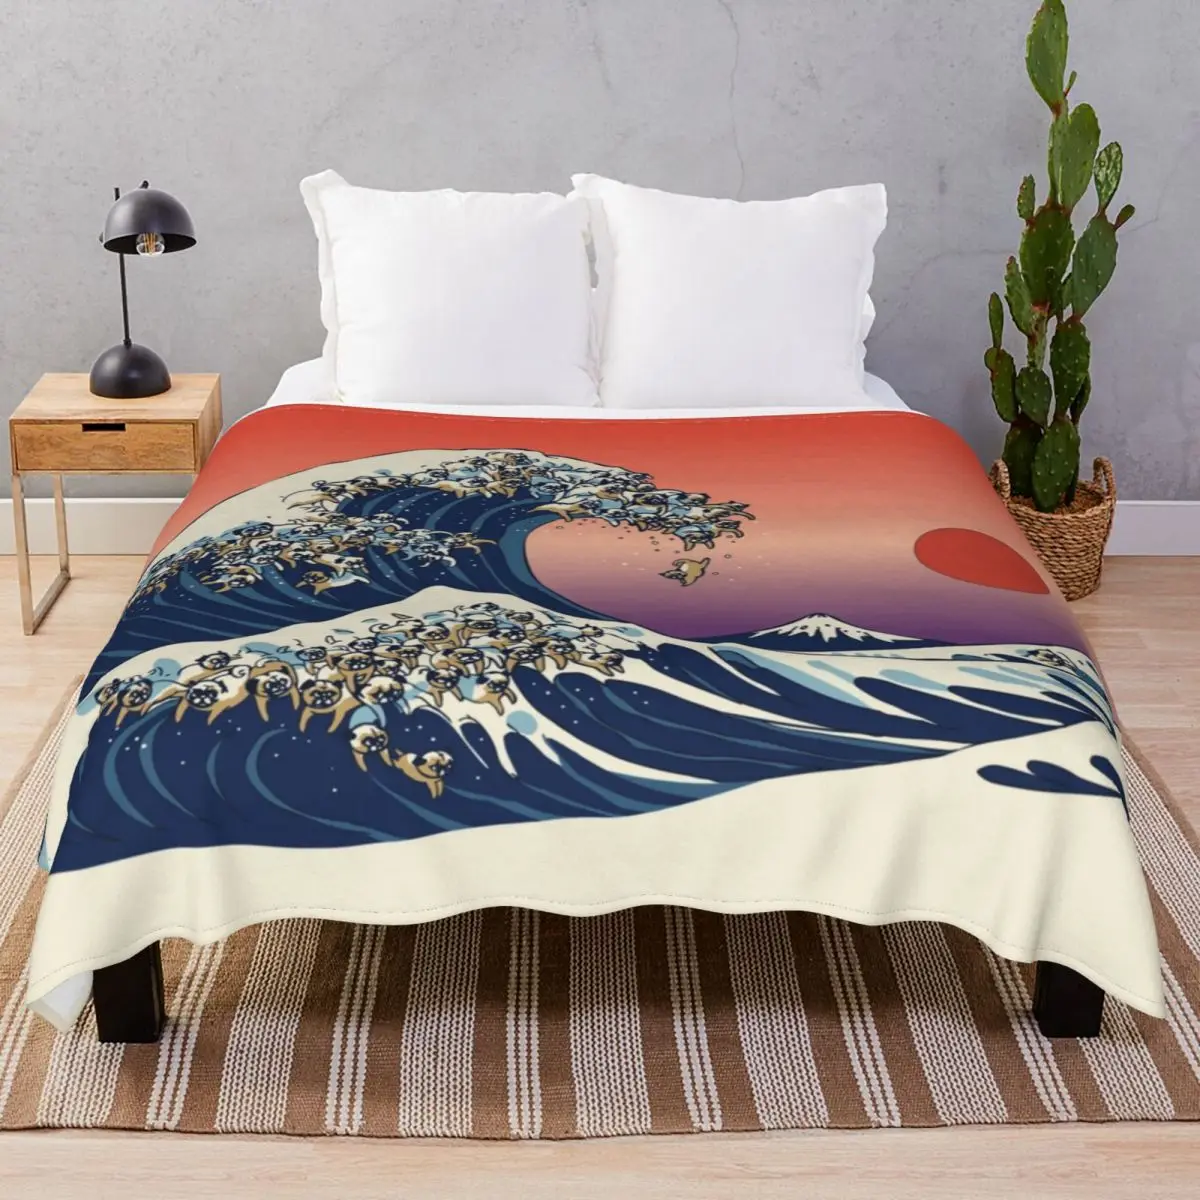 The Great Wave Of Pug Blanket Flannel Plush Decoration Multifunction Throw Blankets for Bedding Home Couch Camp Cinema